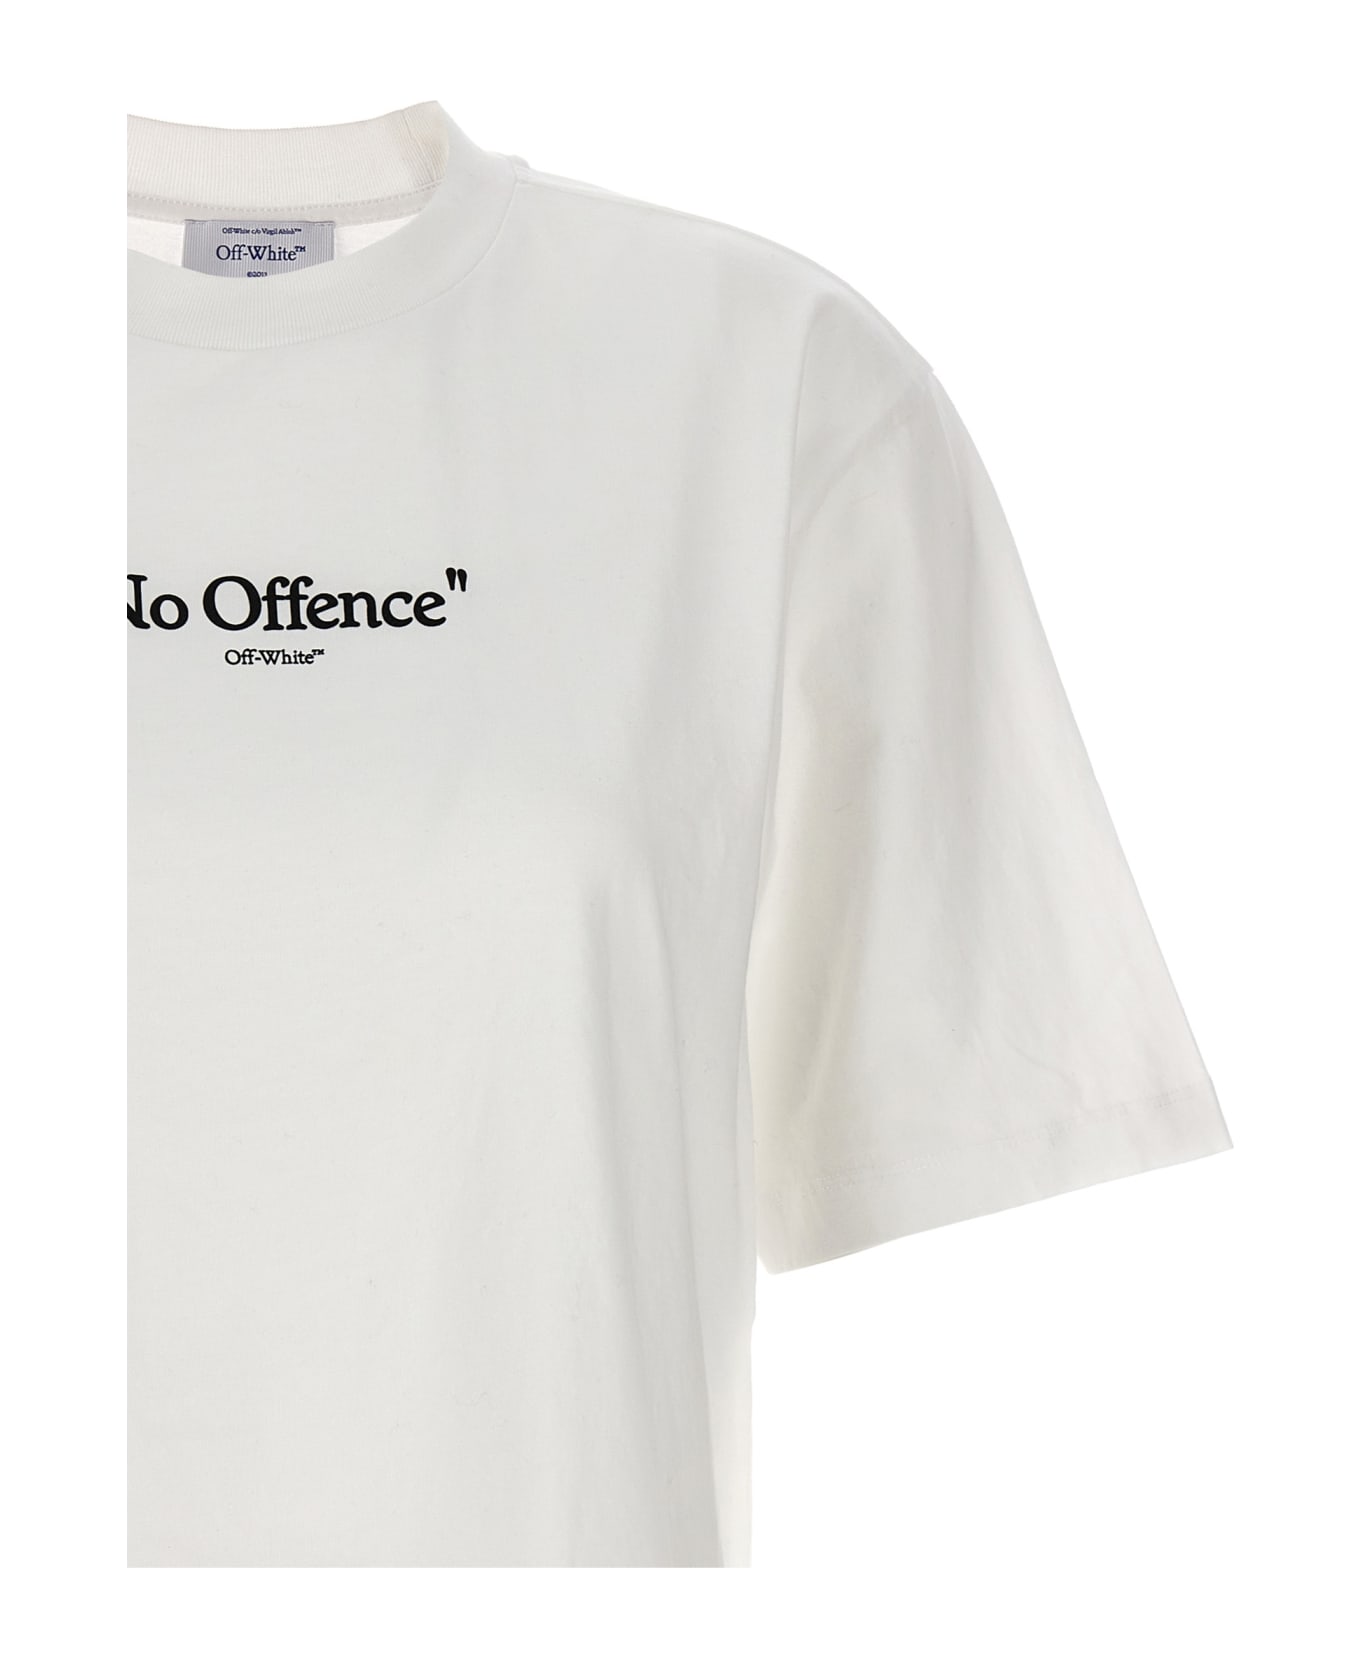 Off-White 'no Offence' T-shirt - White